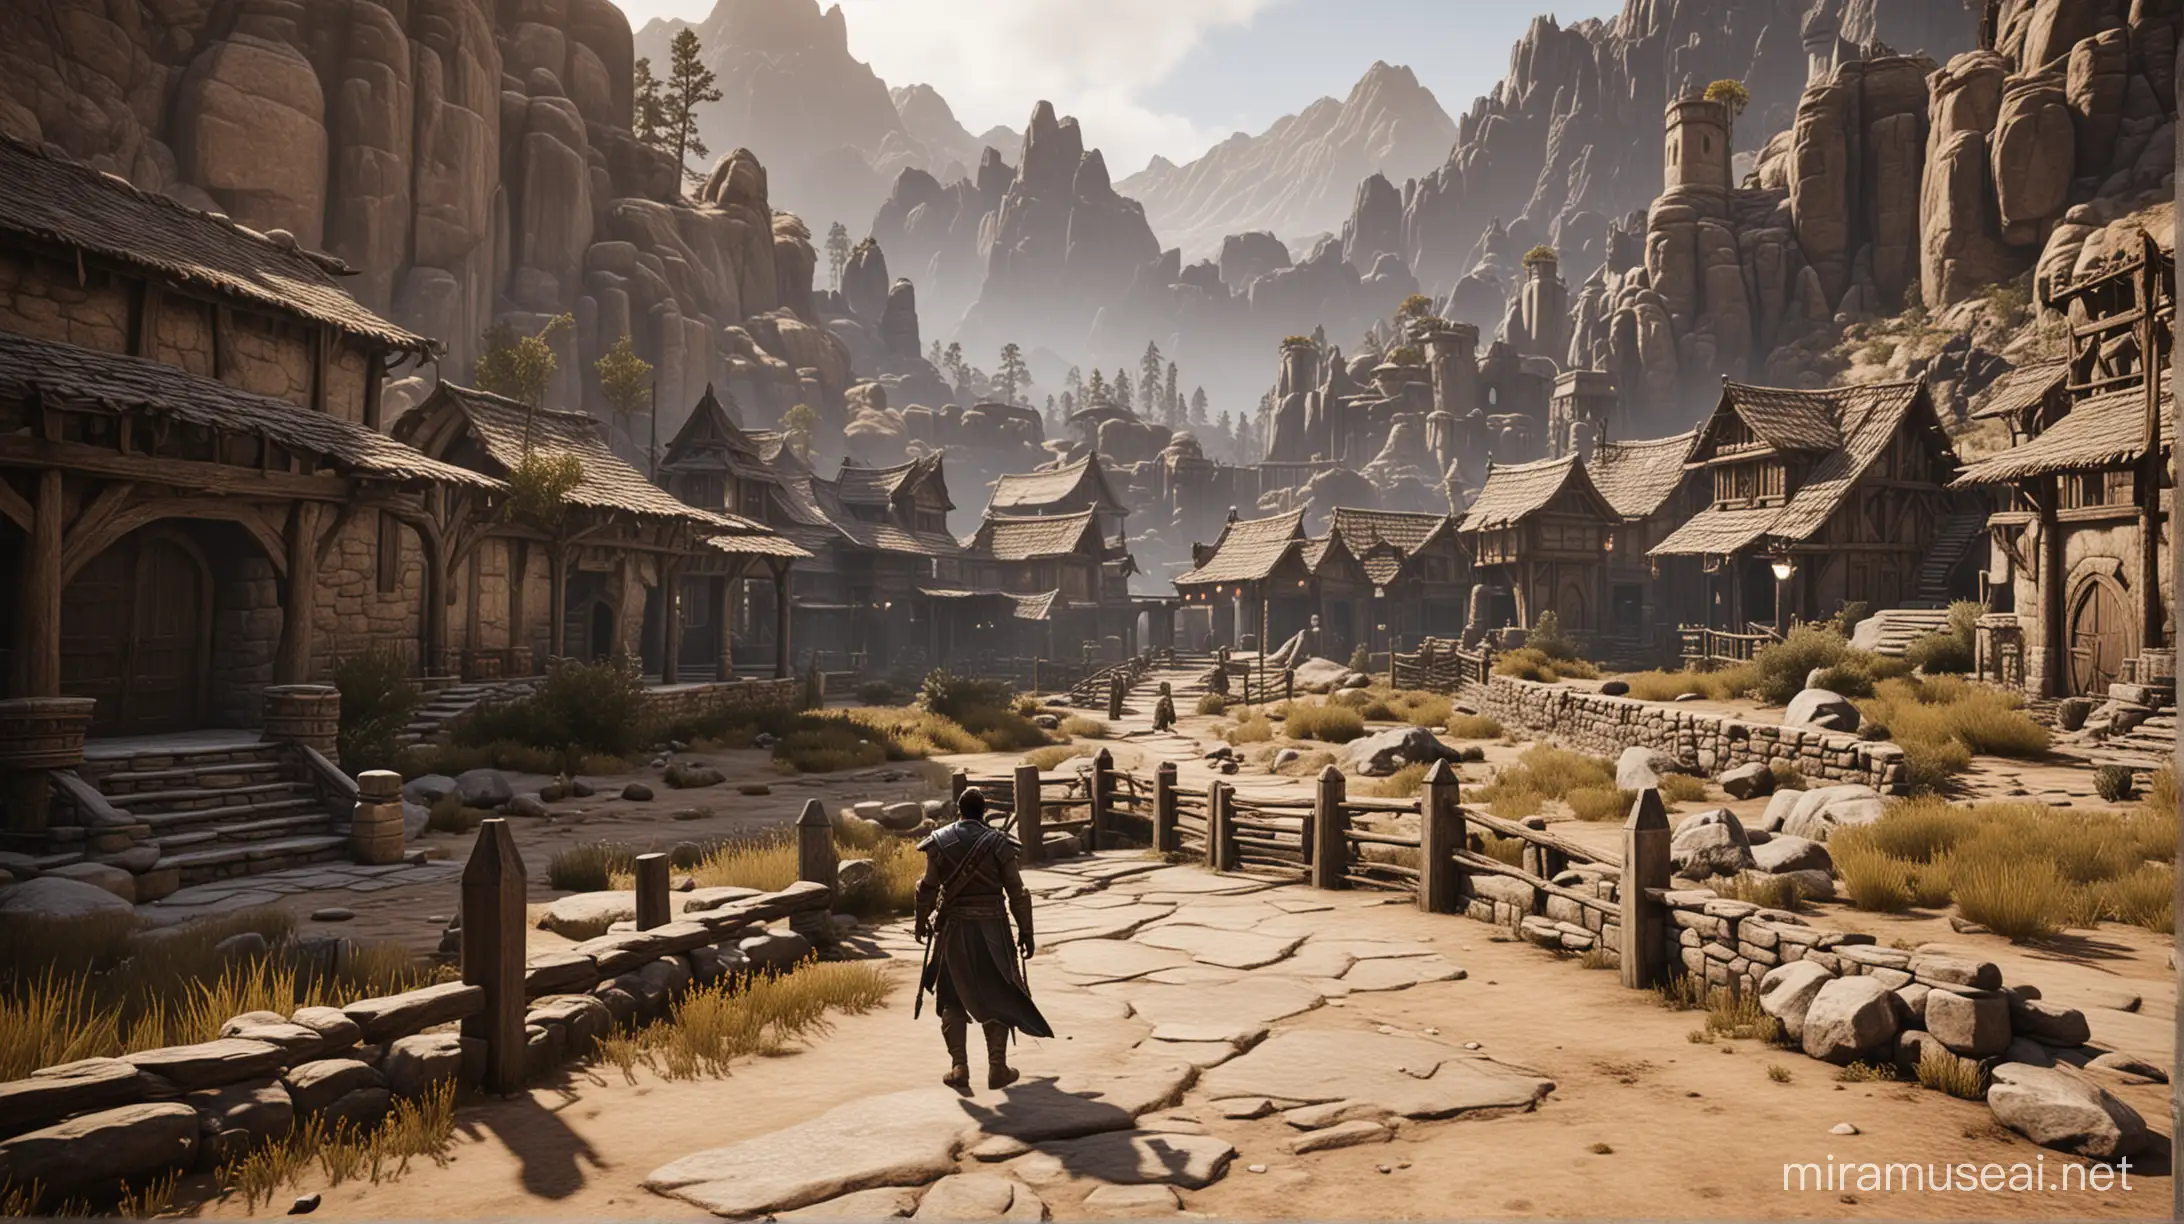 the elder scrolls 6 video game made in unreal engine 5

